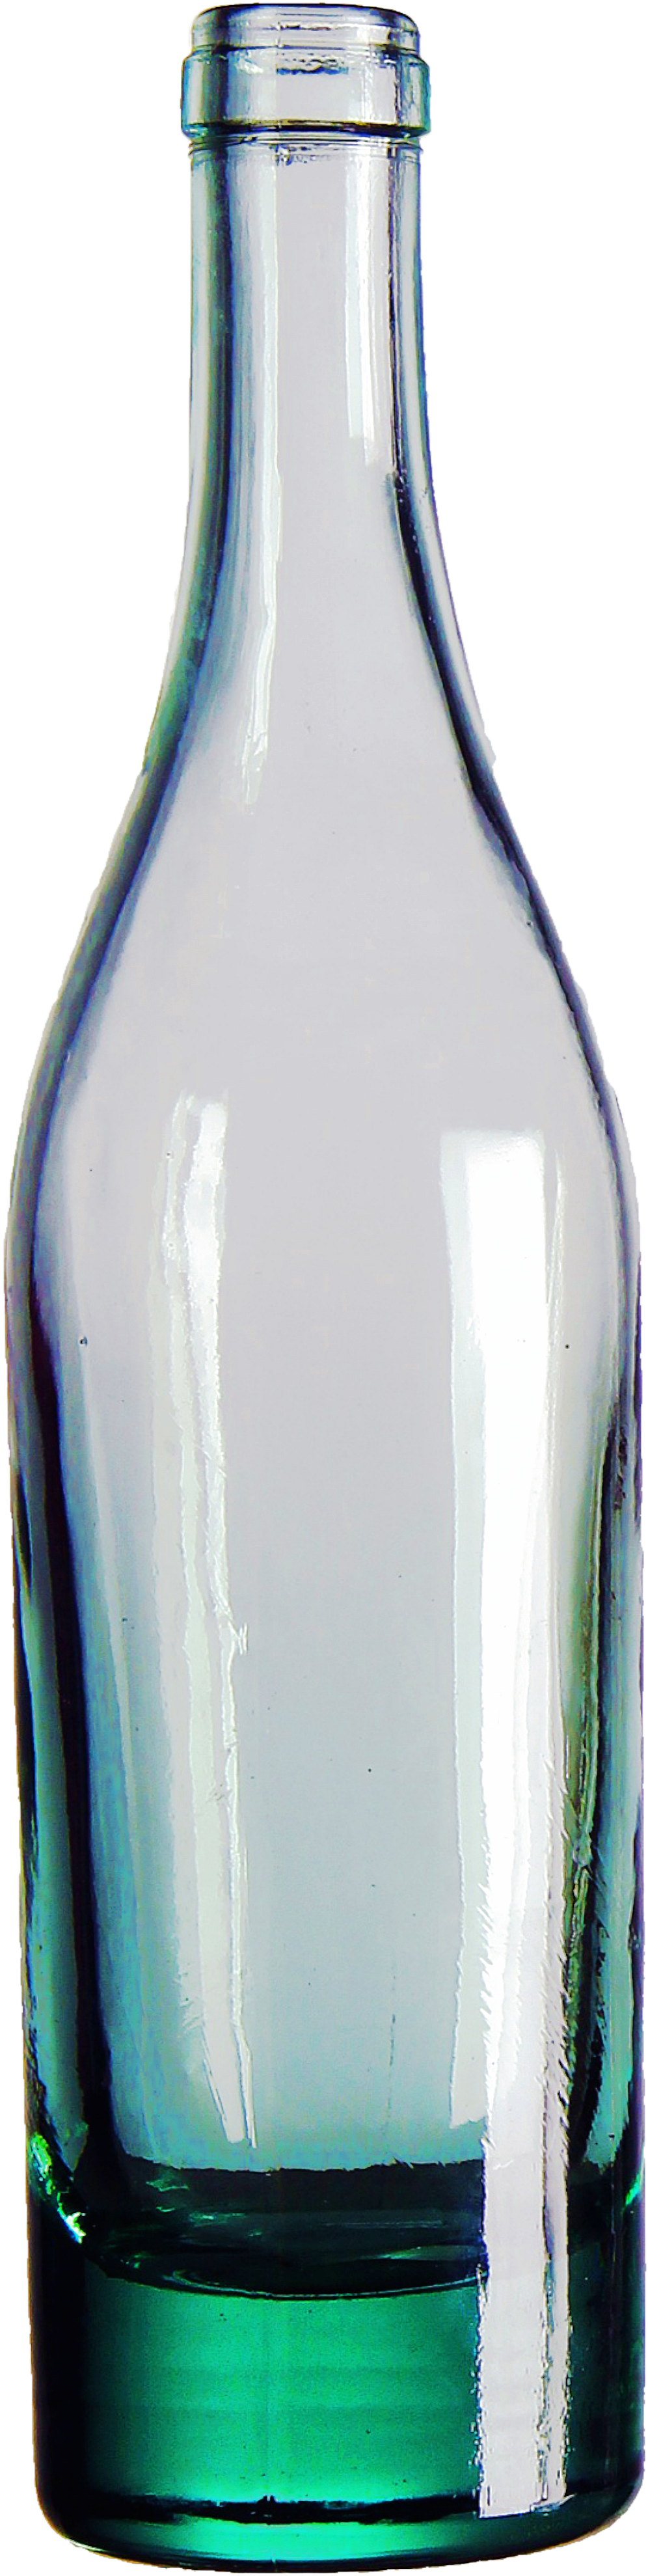 Glass Bottle Empty Download HQ PNG Image